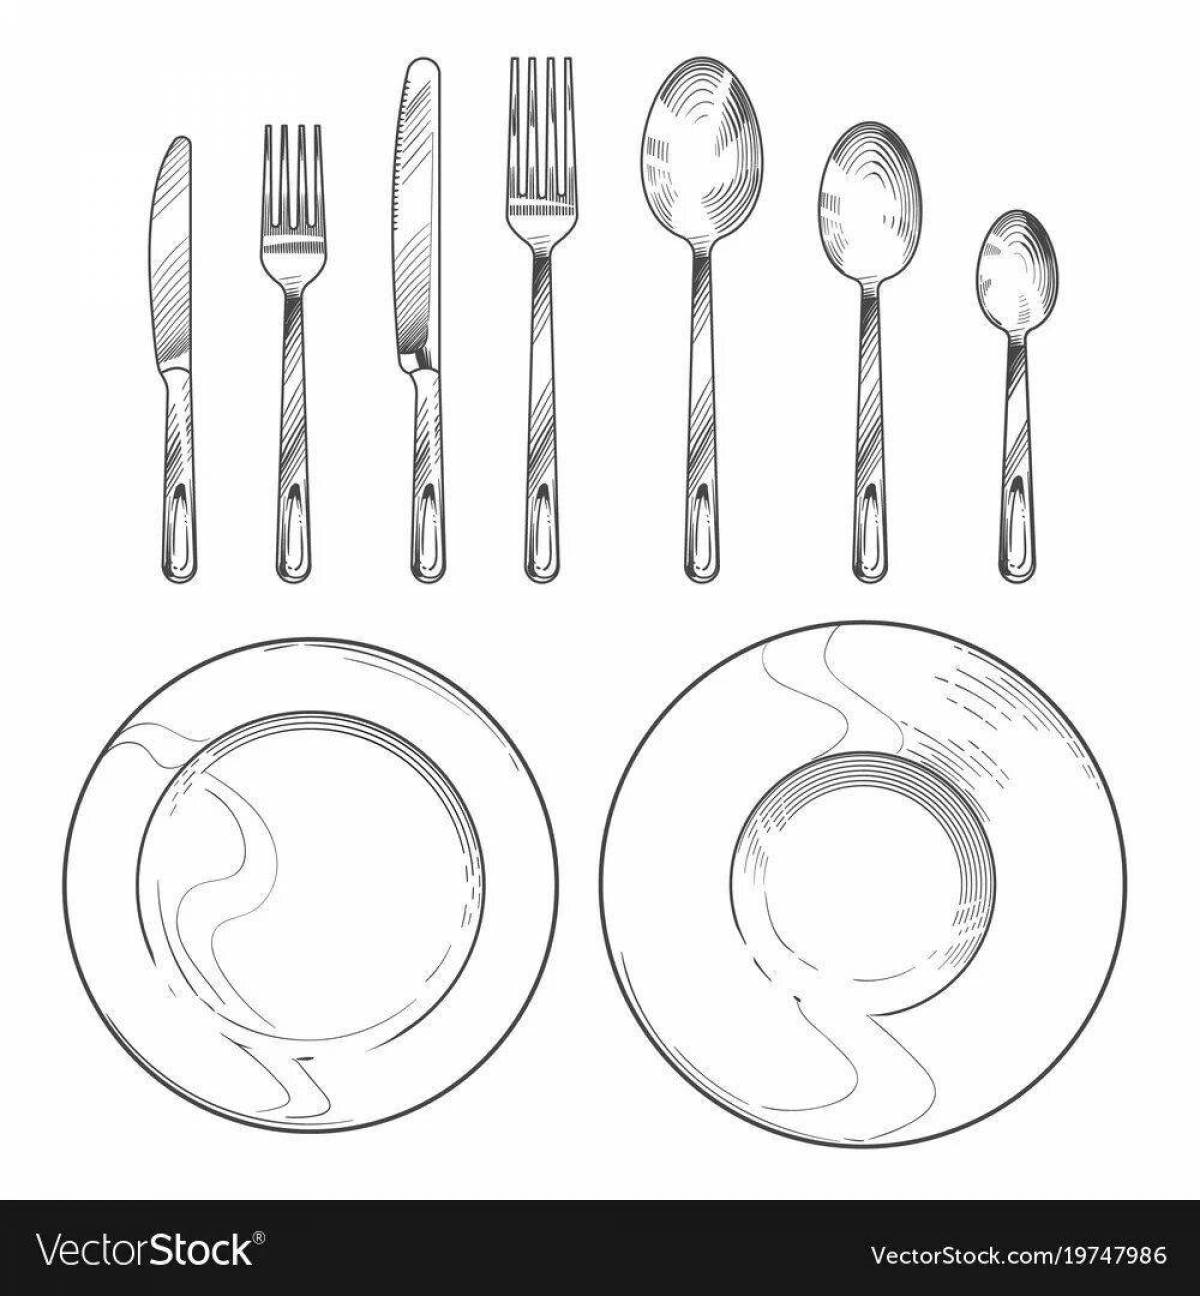 Amazing cutlery coloring page